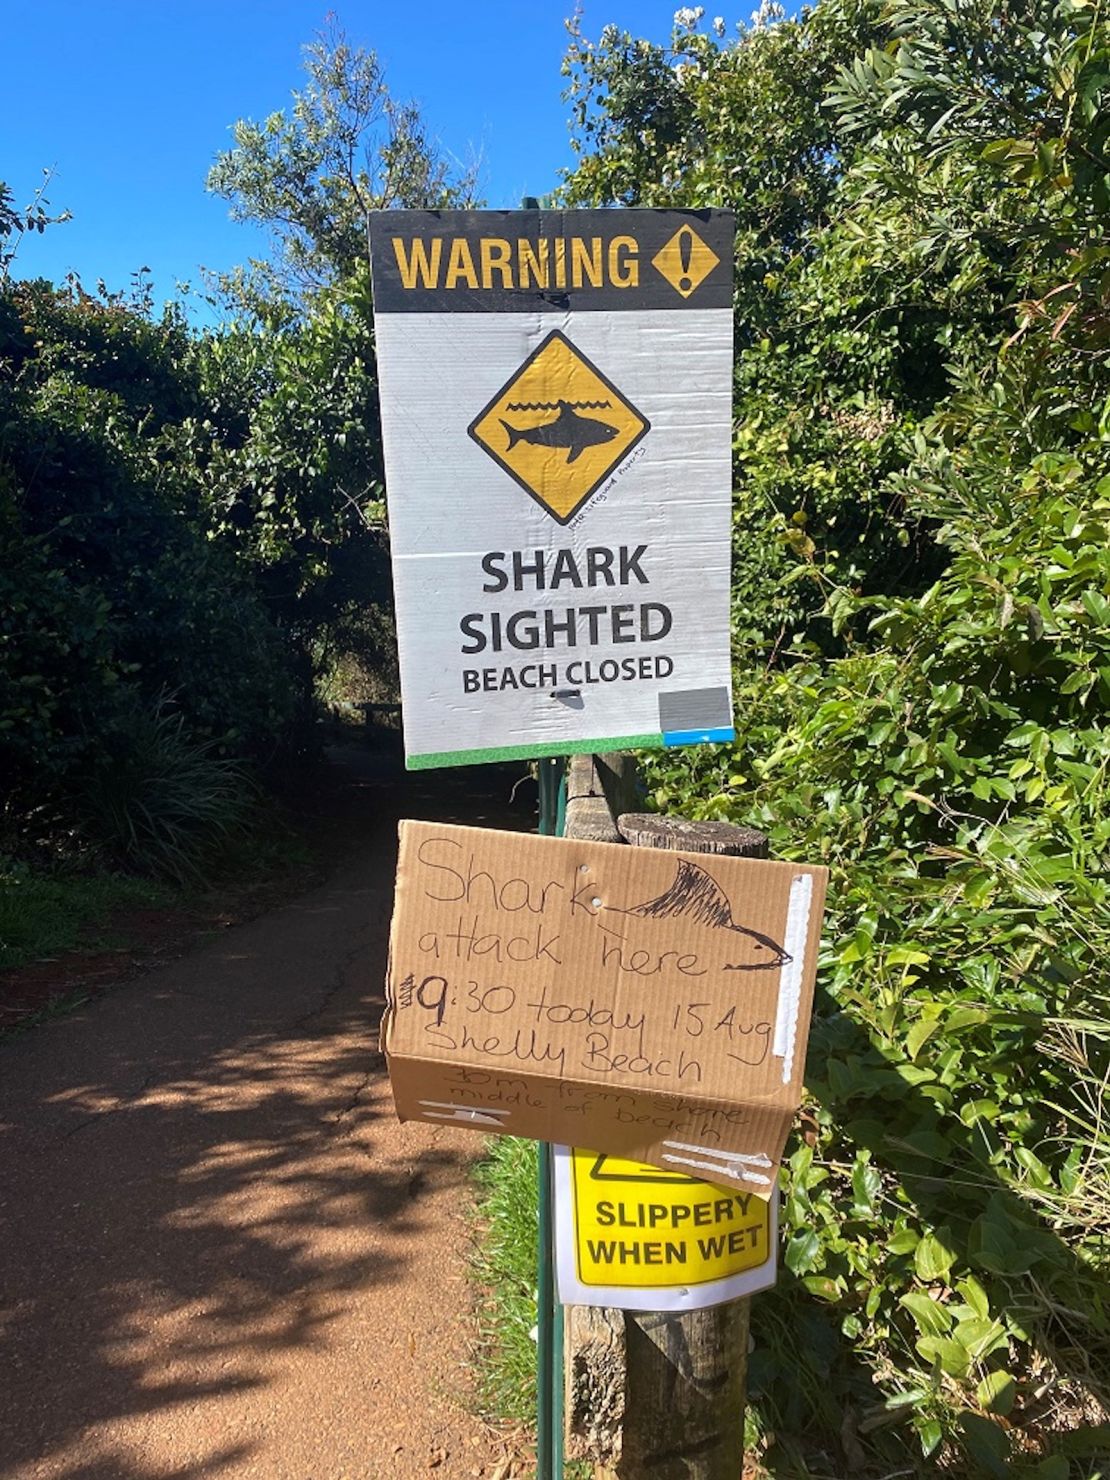 A sign warning of a shark attack on August 15 at Shelley Beach, New South Wales, Australia.